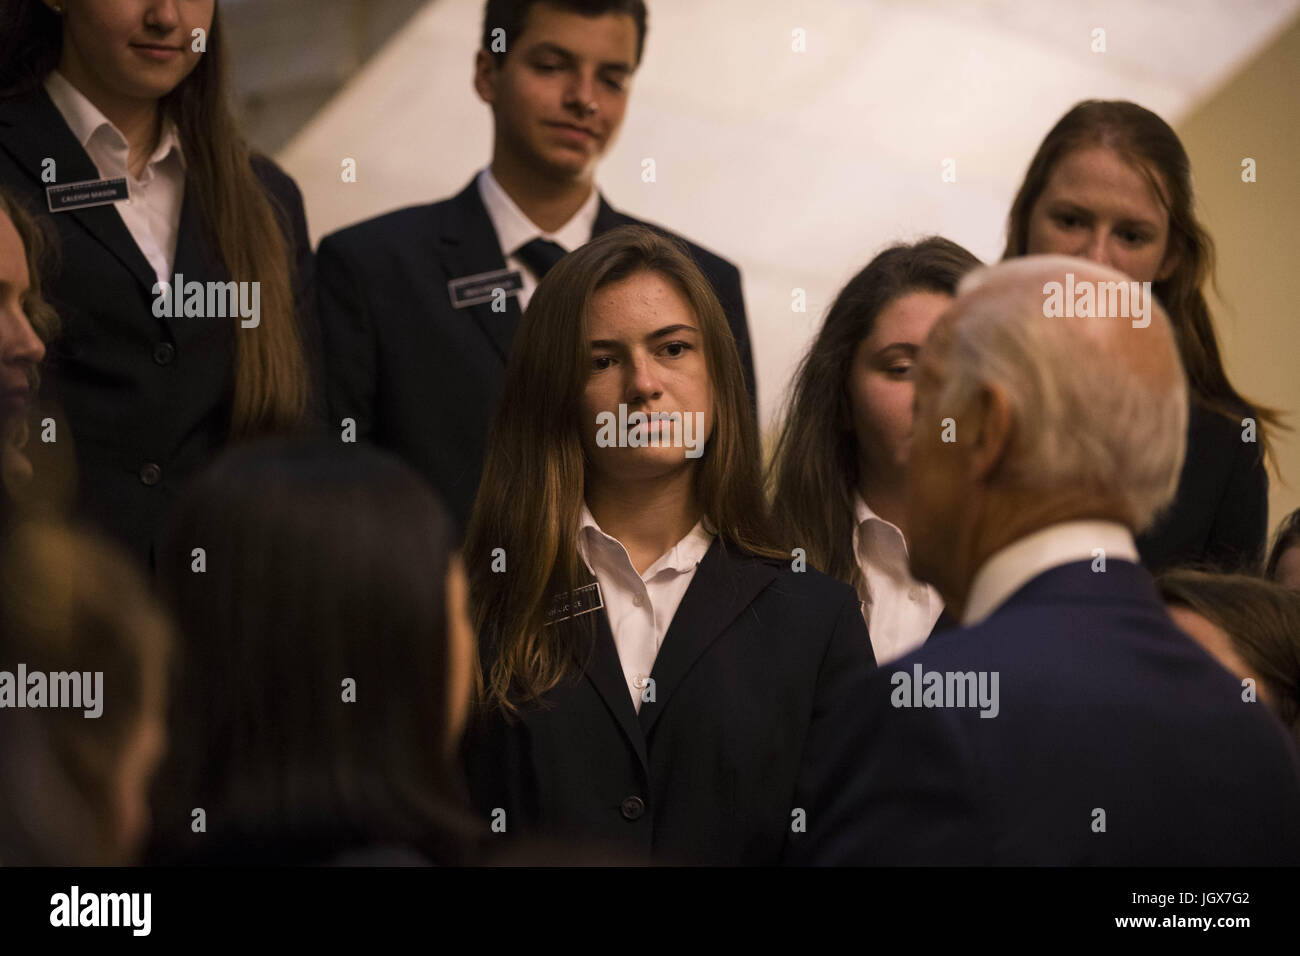 Washington, District of Columbia, USA. 11th July, 2017. A Senate page looks on as Former Vice President Joe Biden speaks to the group after posing for a group photo with Senate Pages' on Capitol Hill on July 11th, 2017. Credit: Alex Edelman/ZUMA Wire/Alamy Live News Stock Photo